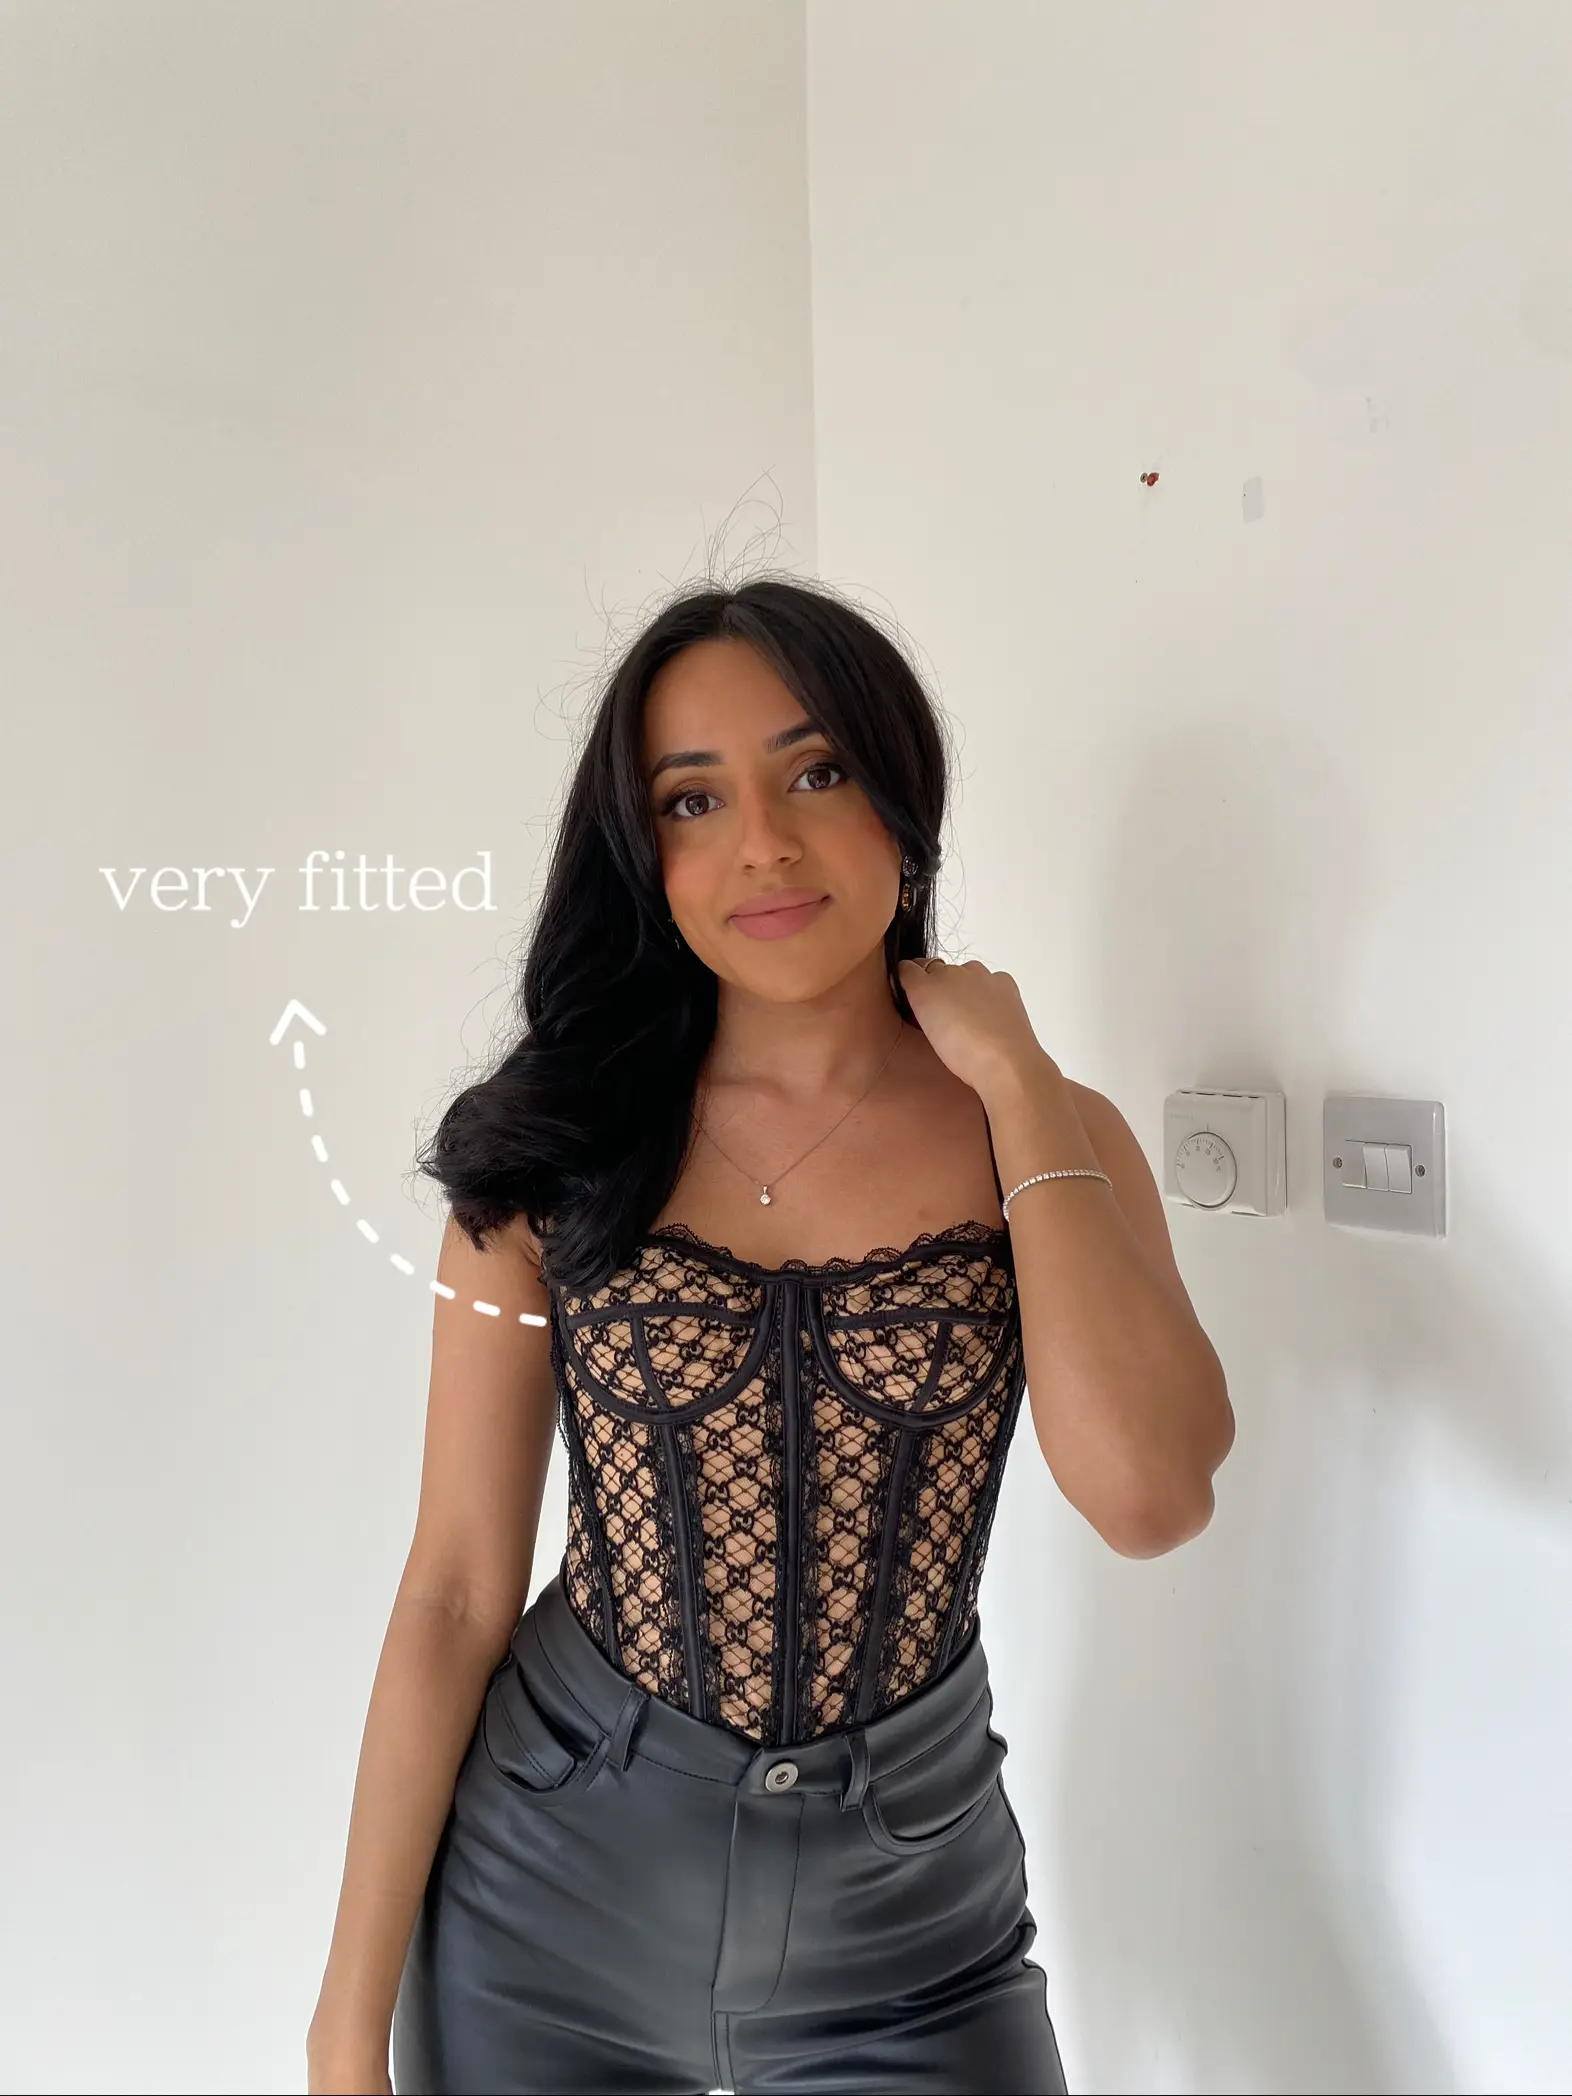 GUCCI CORSET REVIEW, Gallery posted by priyacoco